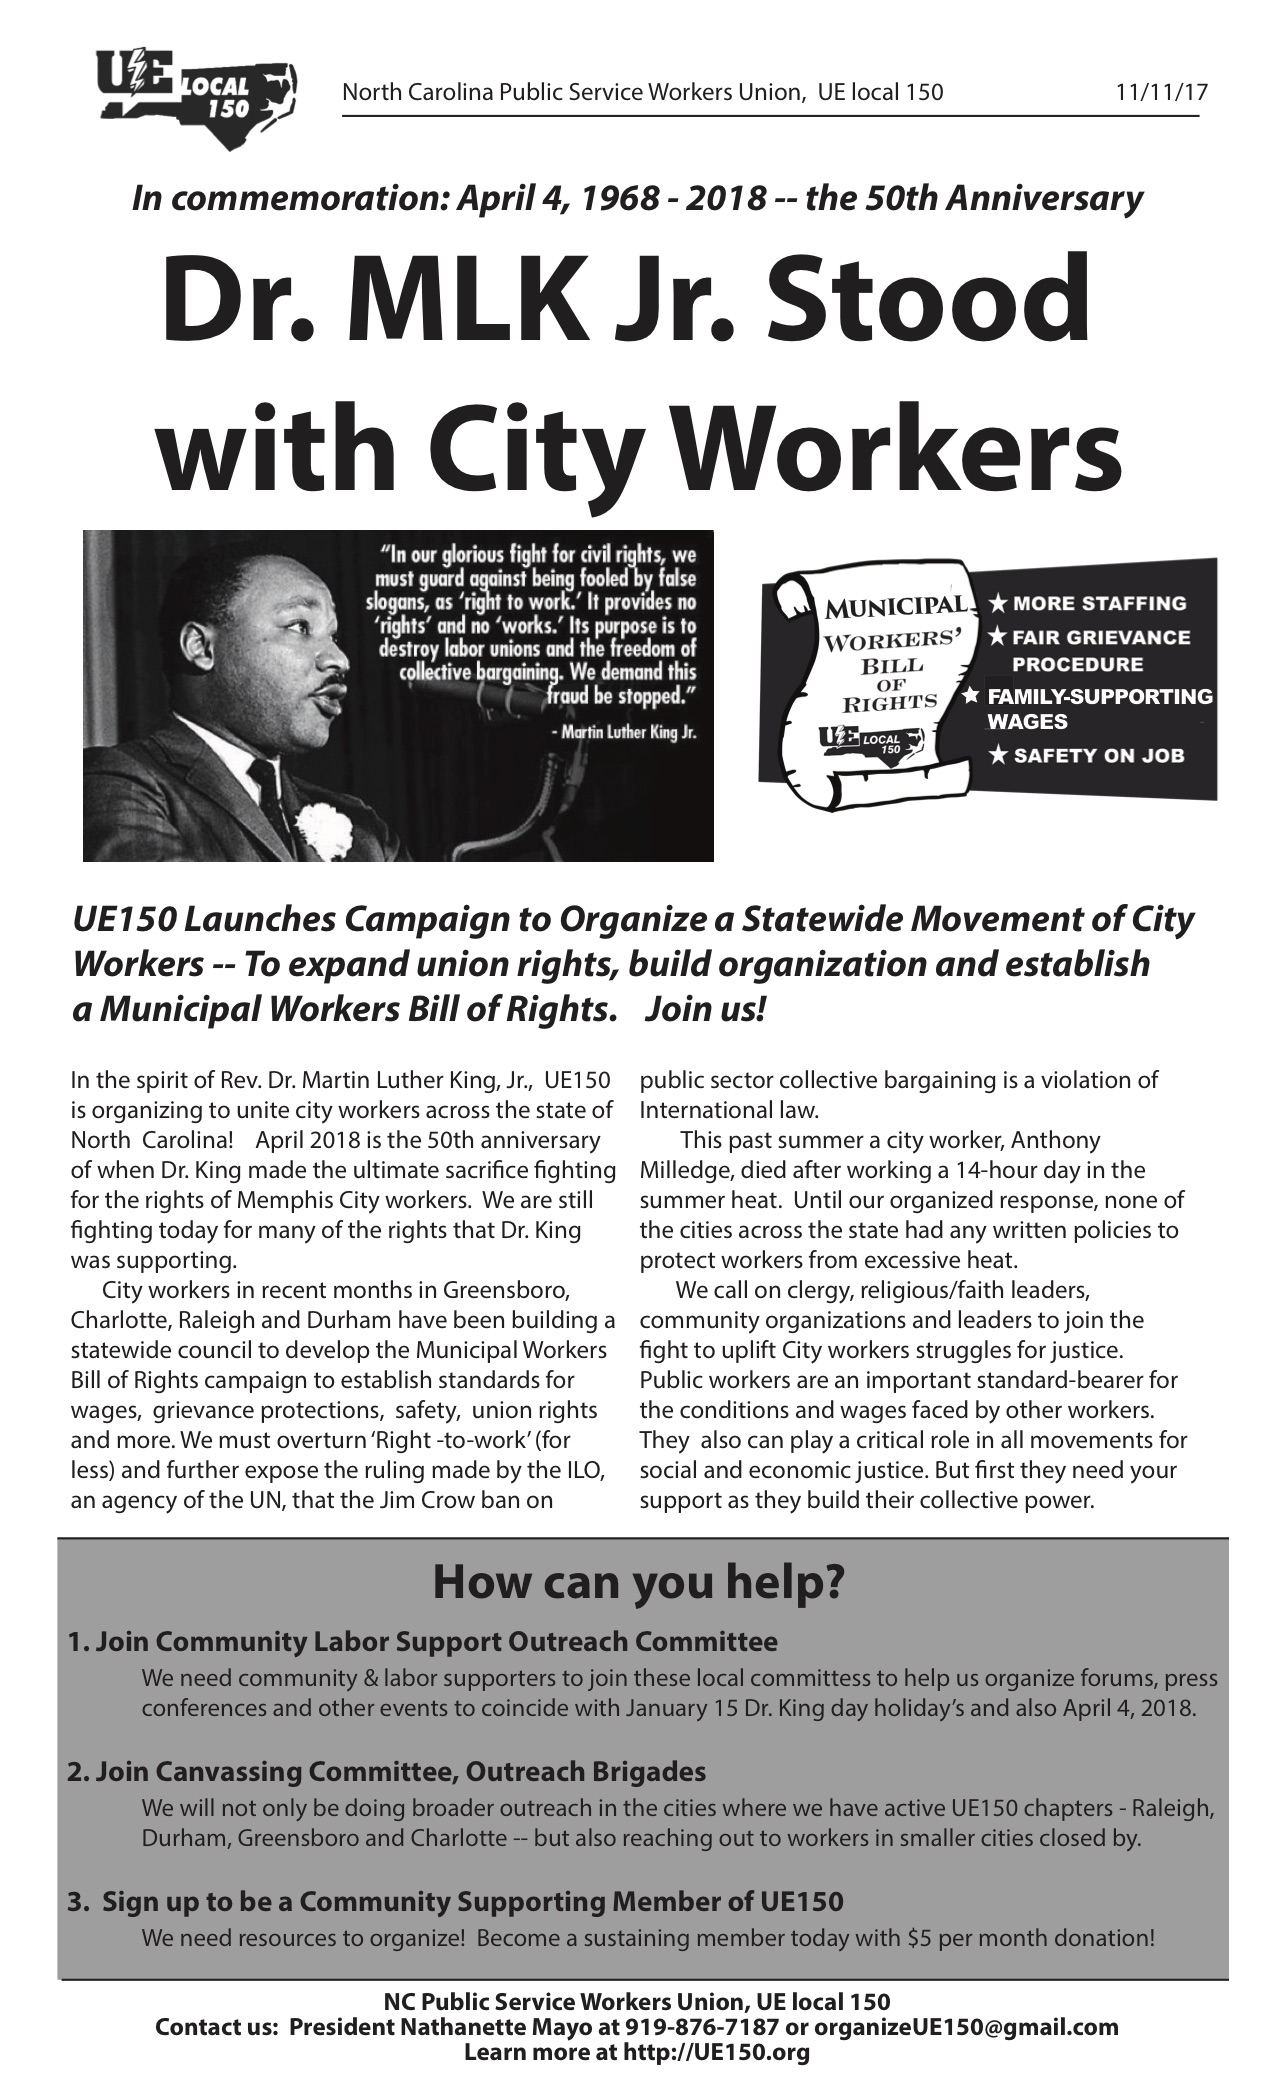 Dr. MLK Jr. Stood with City Workers